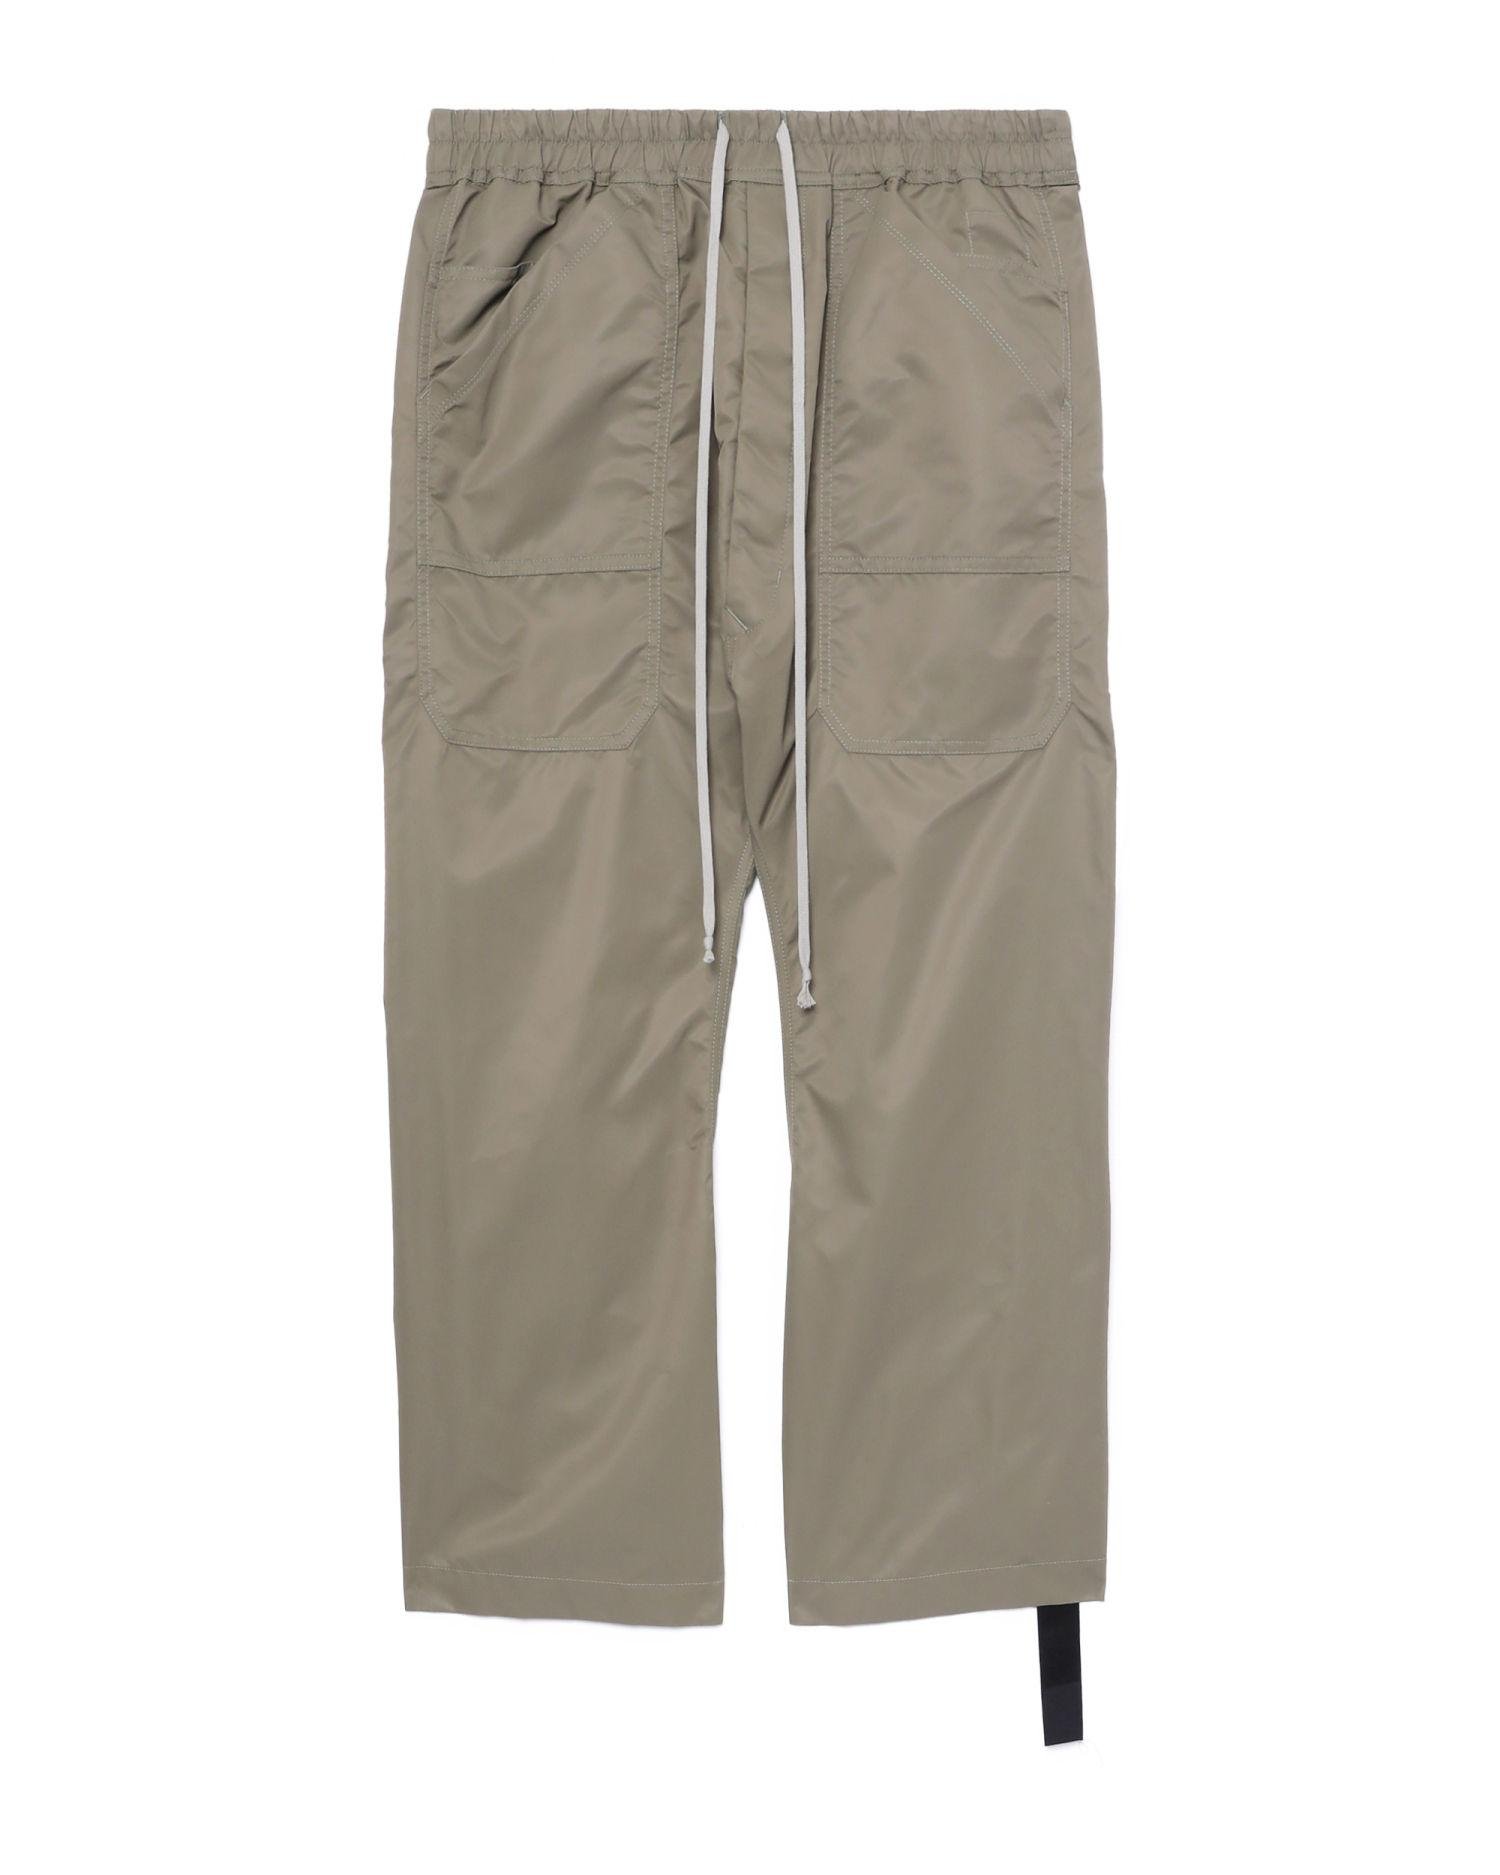 Classic cropped cargo pants by RICK OWENS DRKSHDW